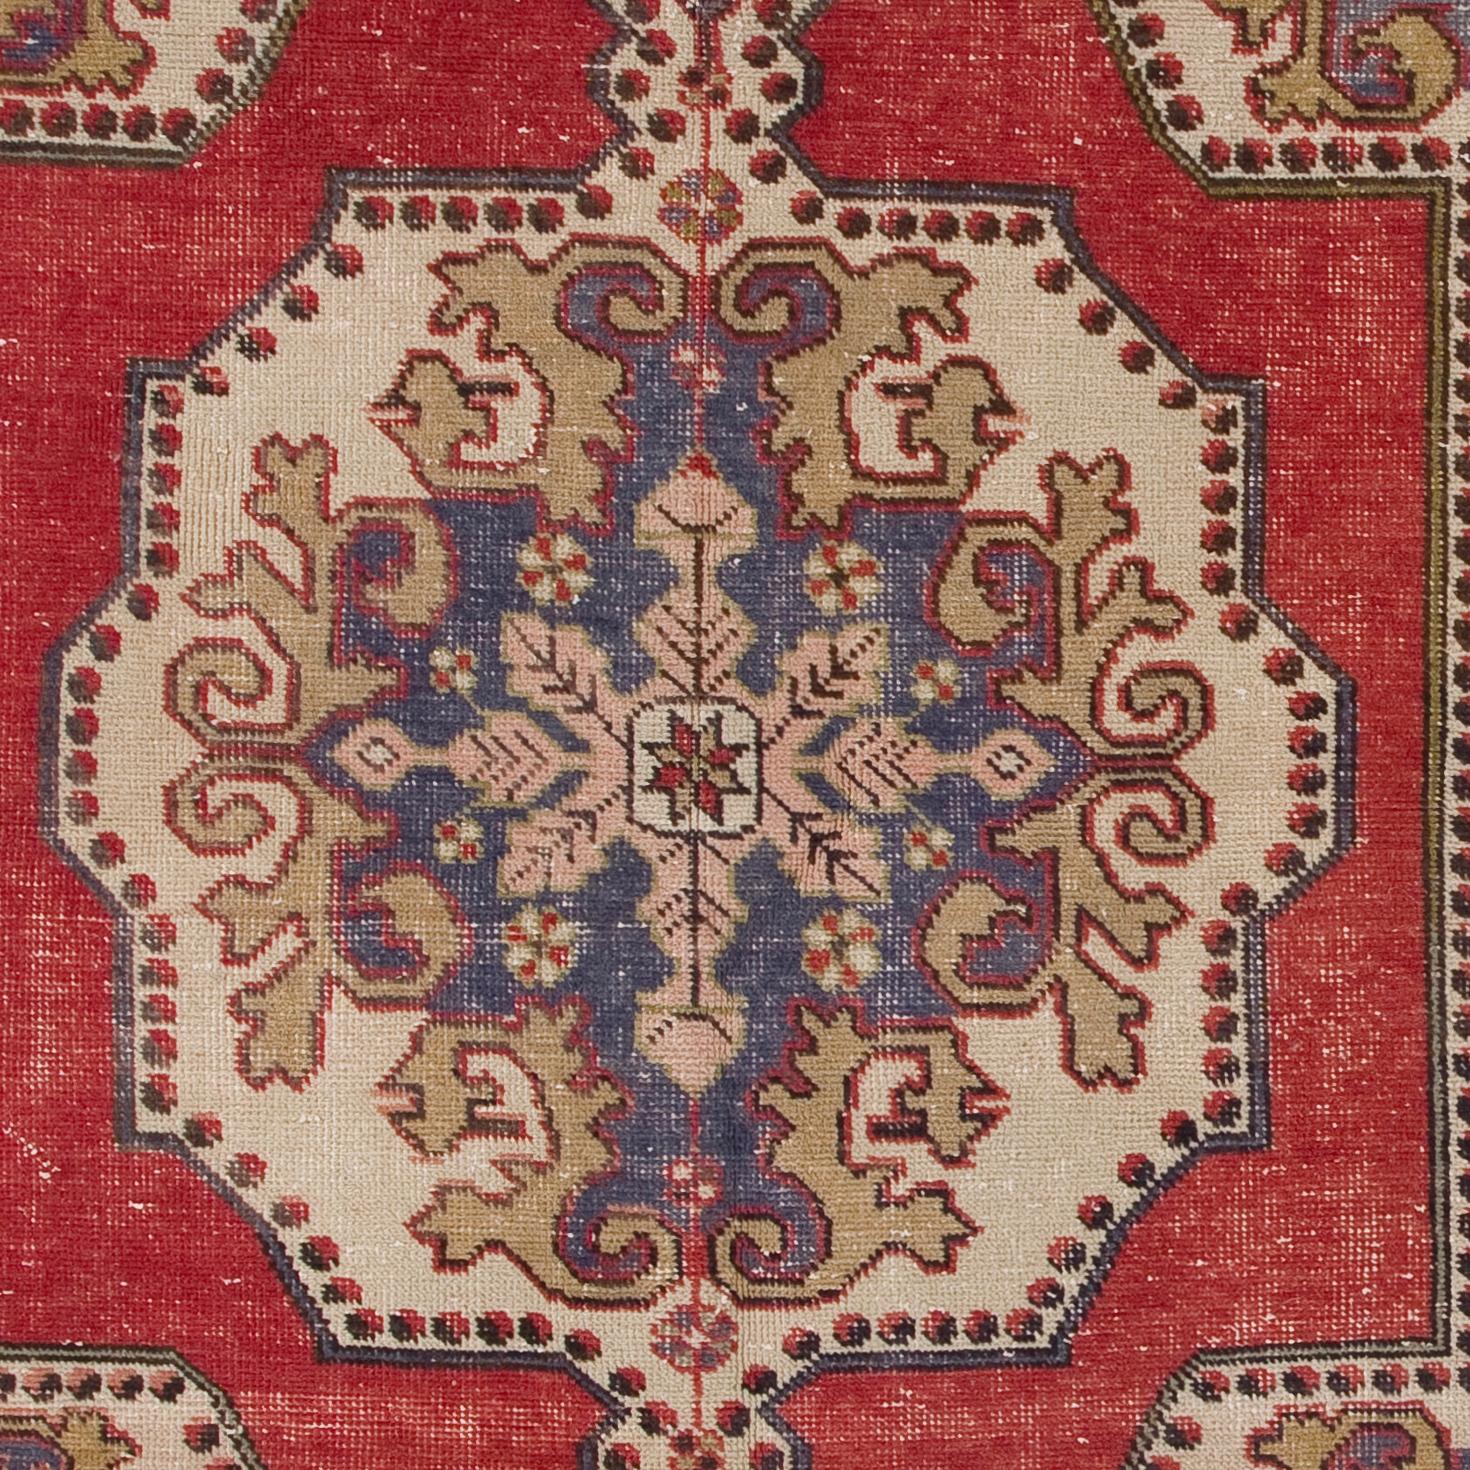 Tribal 4.4x7.2 Ft Unique Anatolian Accent Rug with Floral Border. Red, Beige and Blue For Sale